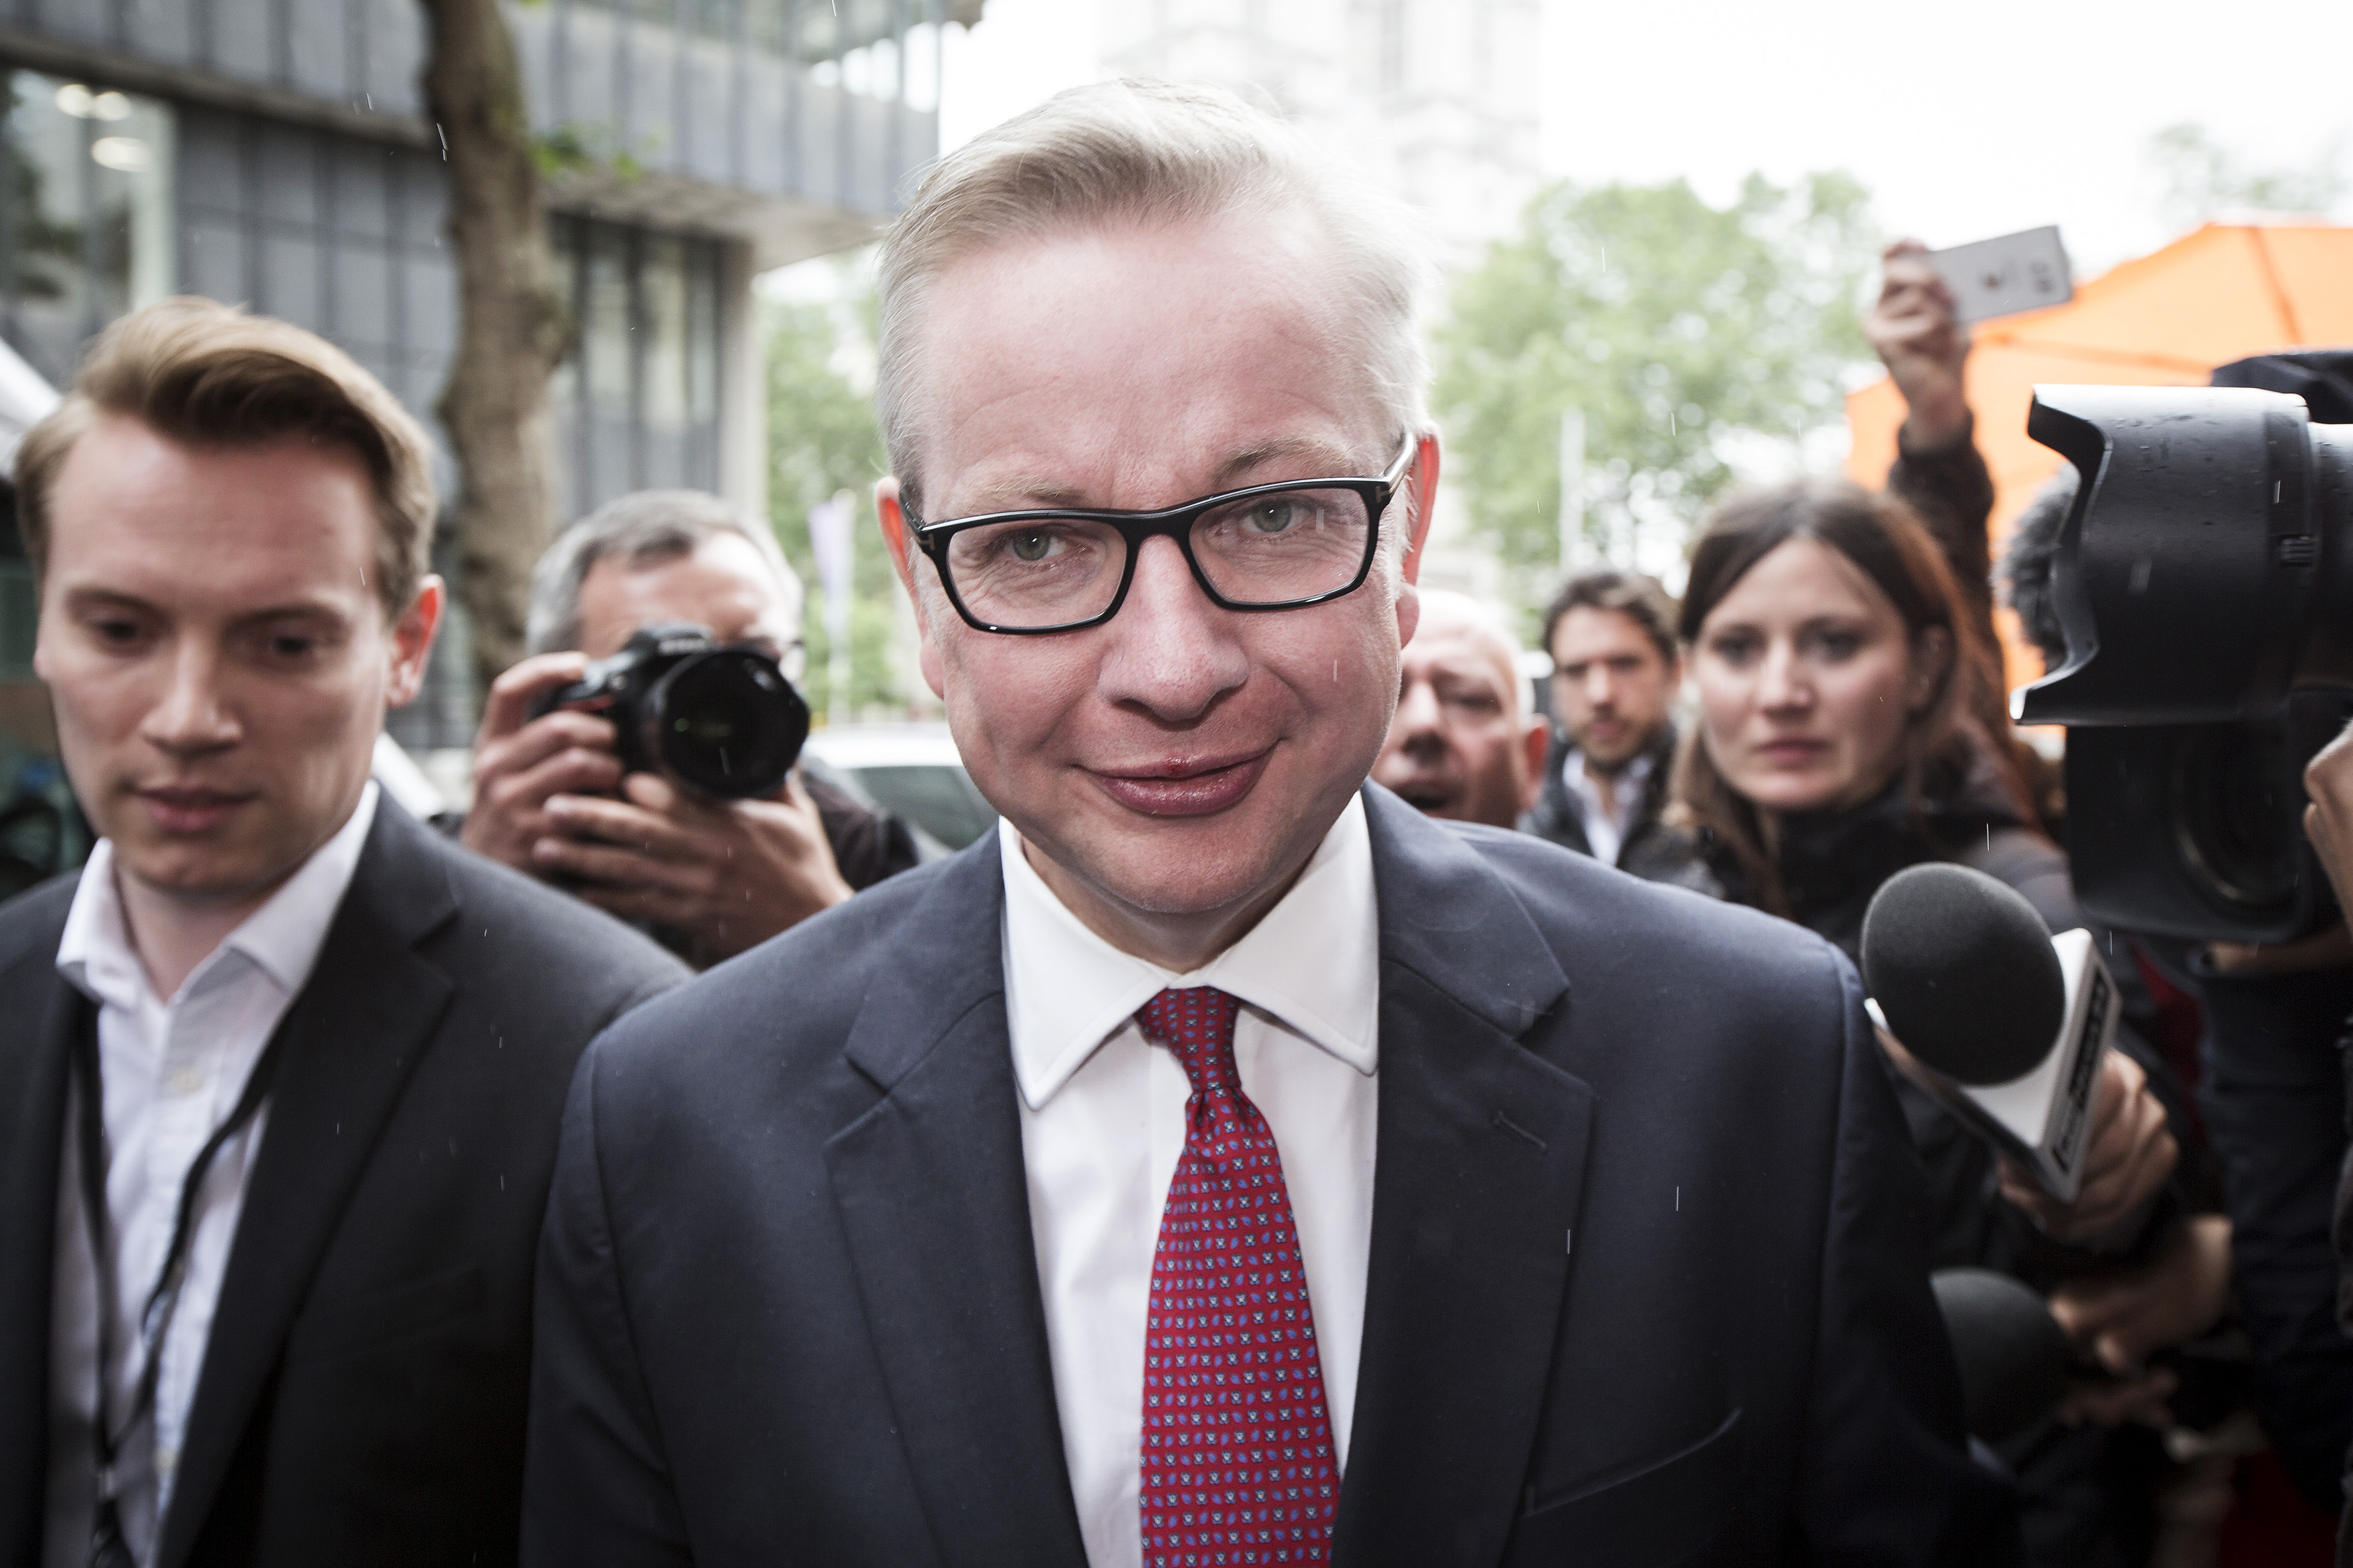 Michael Gove, U.K. justice secretary, looks on as he arrives for a news conference to announce his Conservative party leadership bid in London, U.K., on Friday, July 1, 2016. (Jason Alden—Bloomberg/Getty Images)